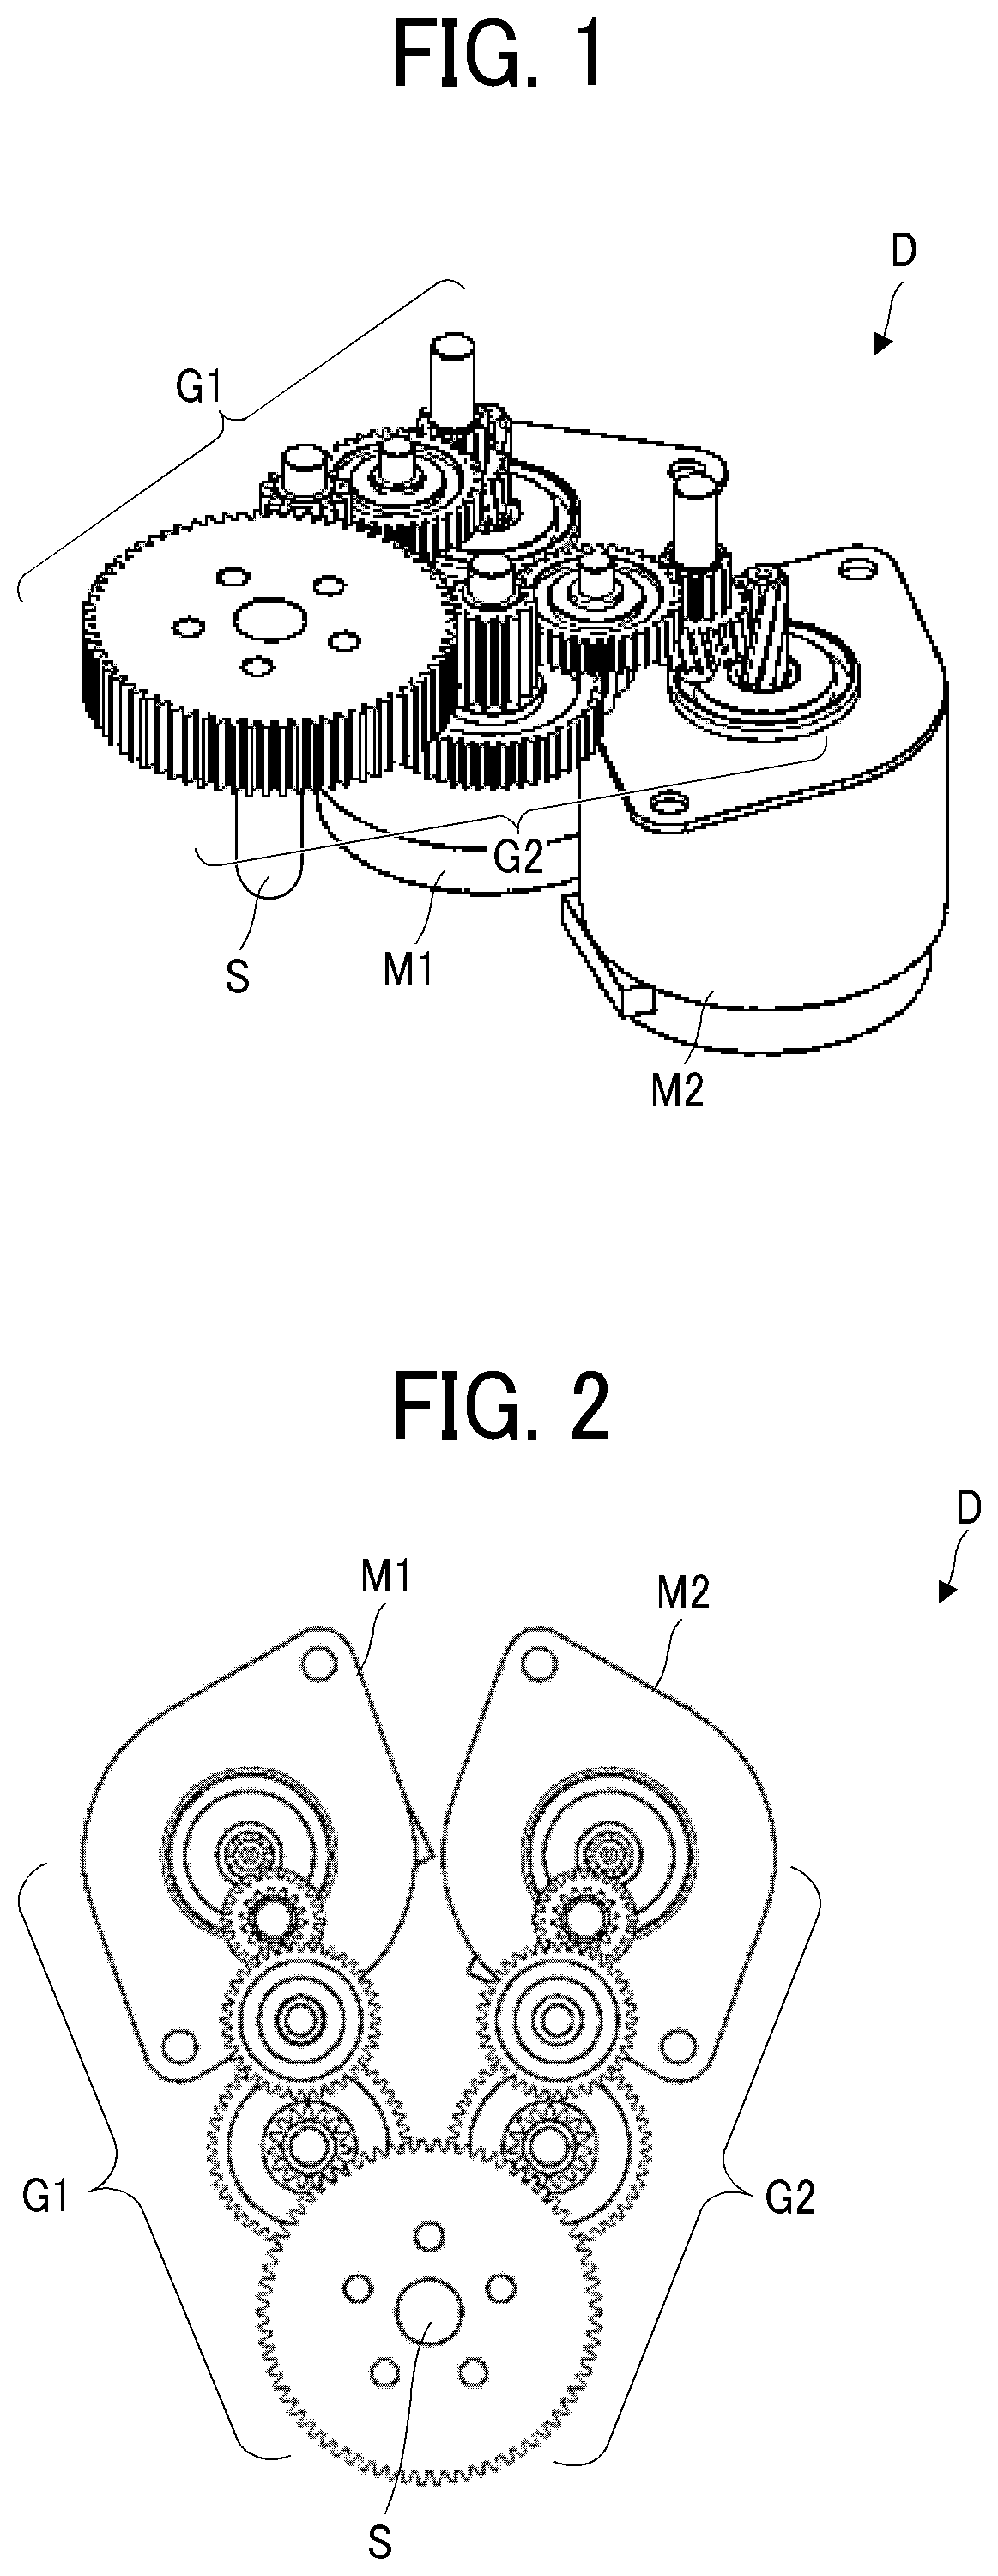 Drive device for correcting angular deviation between shafts